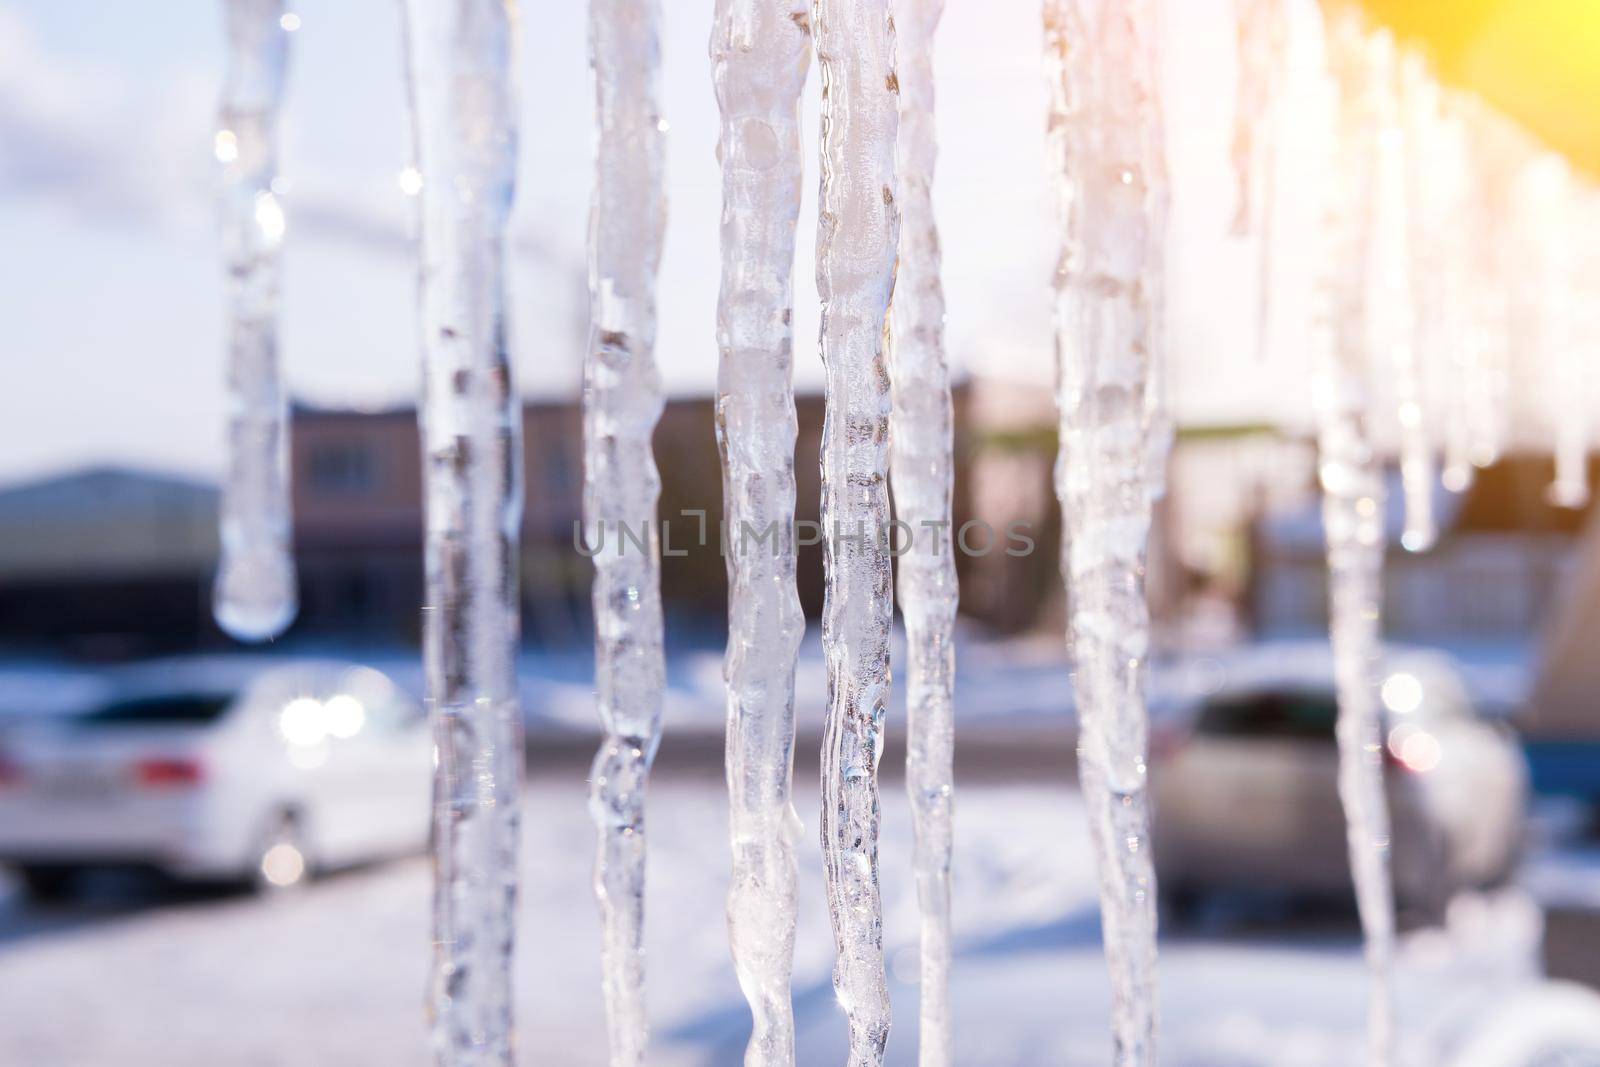 Covered with ice and icicles after freezing rain. Winter frosty scenes. Selective focus by darksoul72